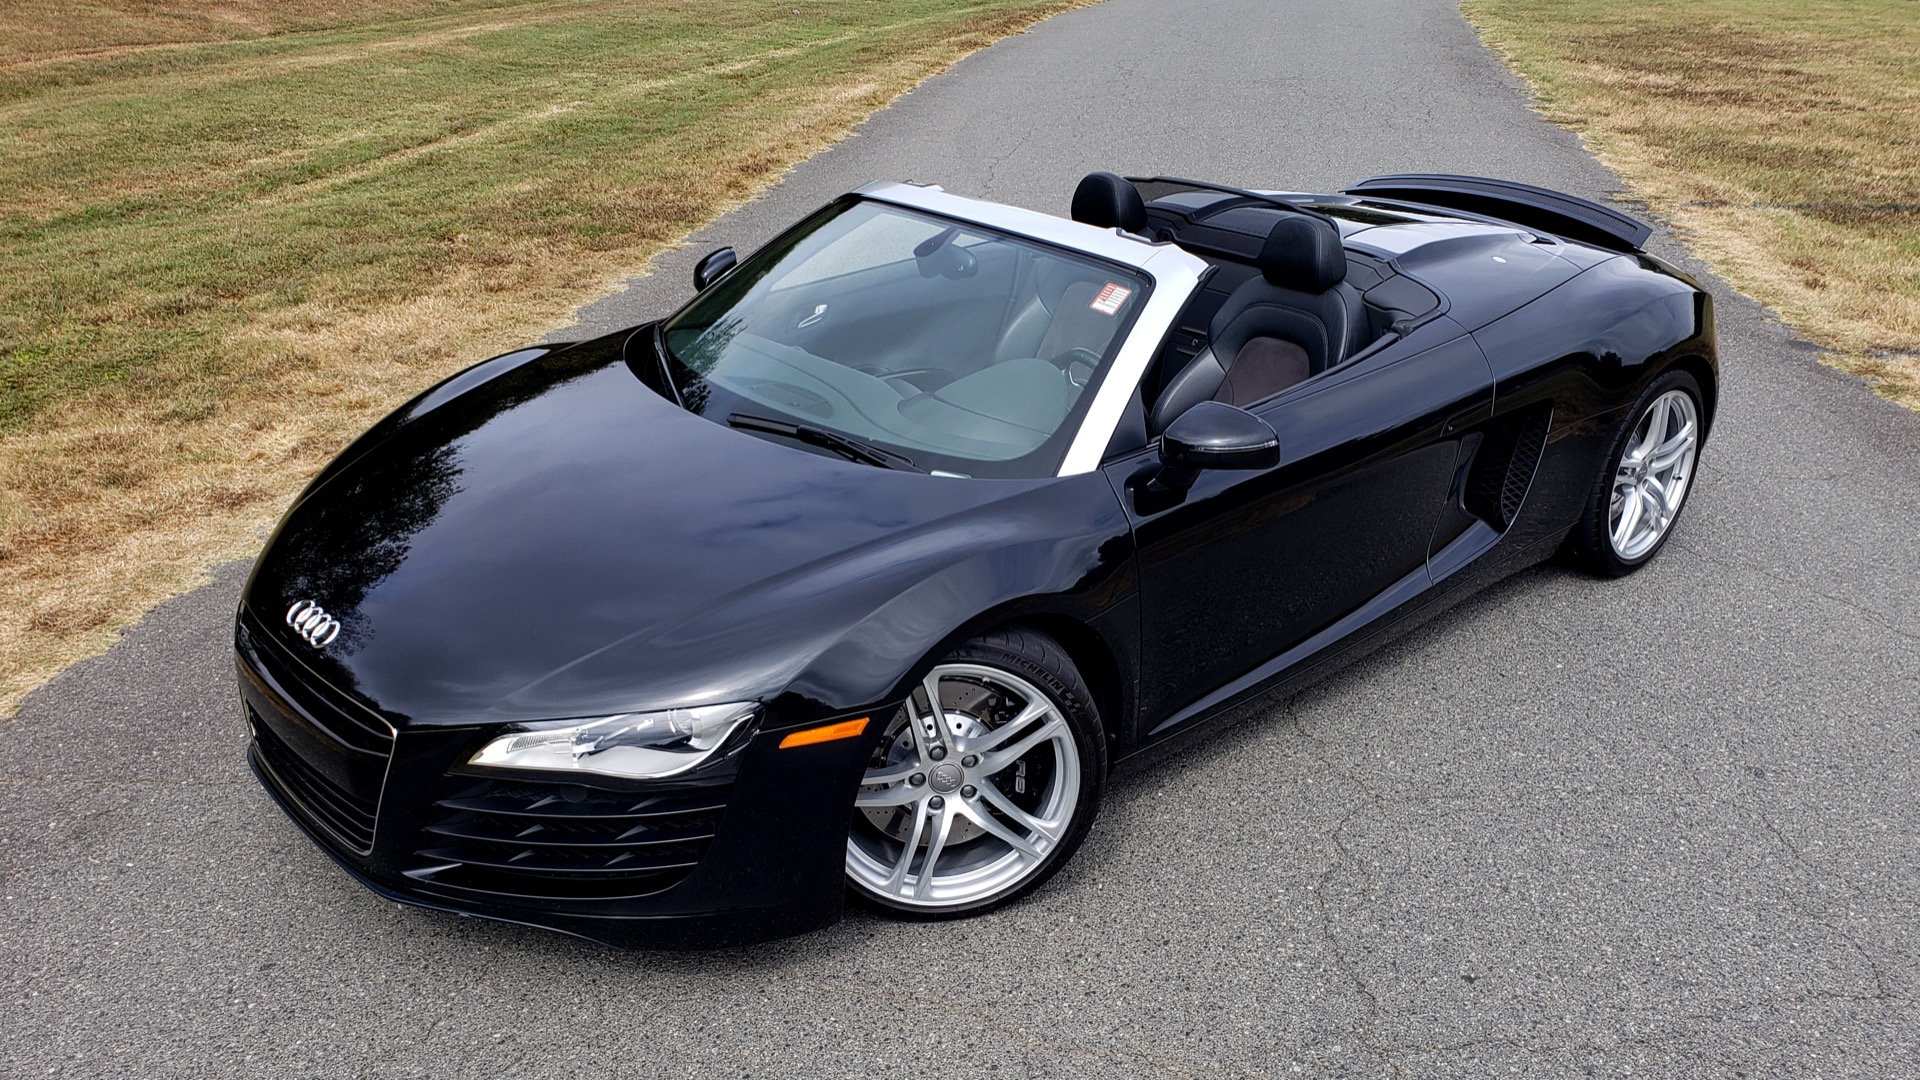 Used 2011 Audi R8 4.2L SPYDER QUATTRO / NAV / 19 IN WHEELS / LOW MILES for sale Sold at Formula Imports in Charlotte NC 28227 1